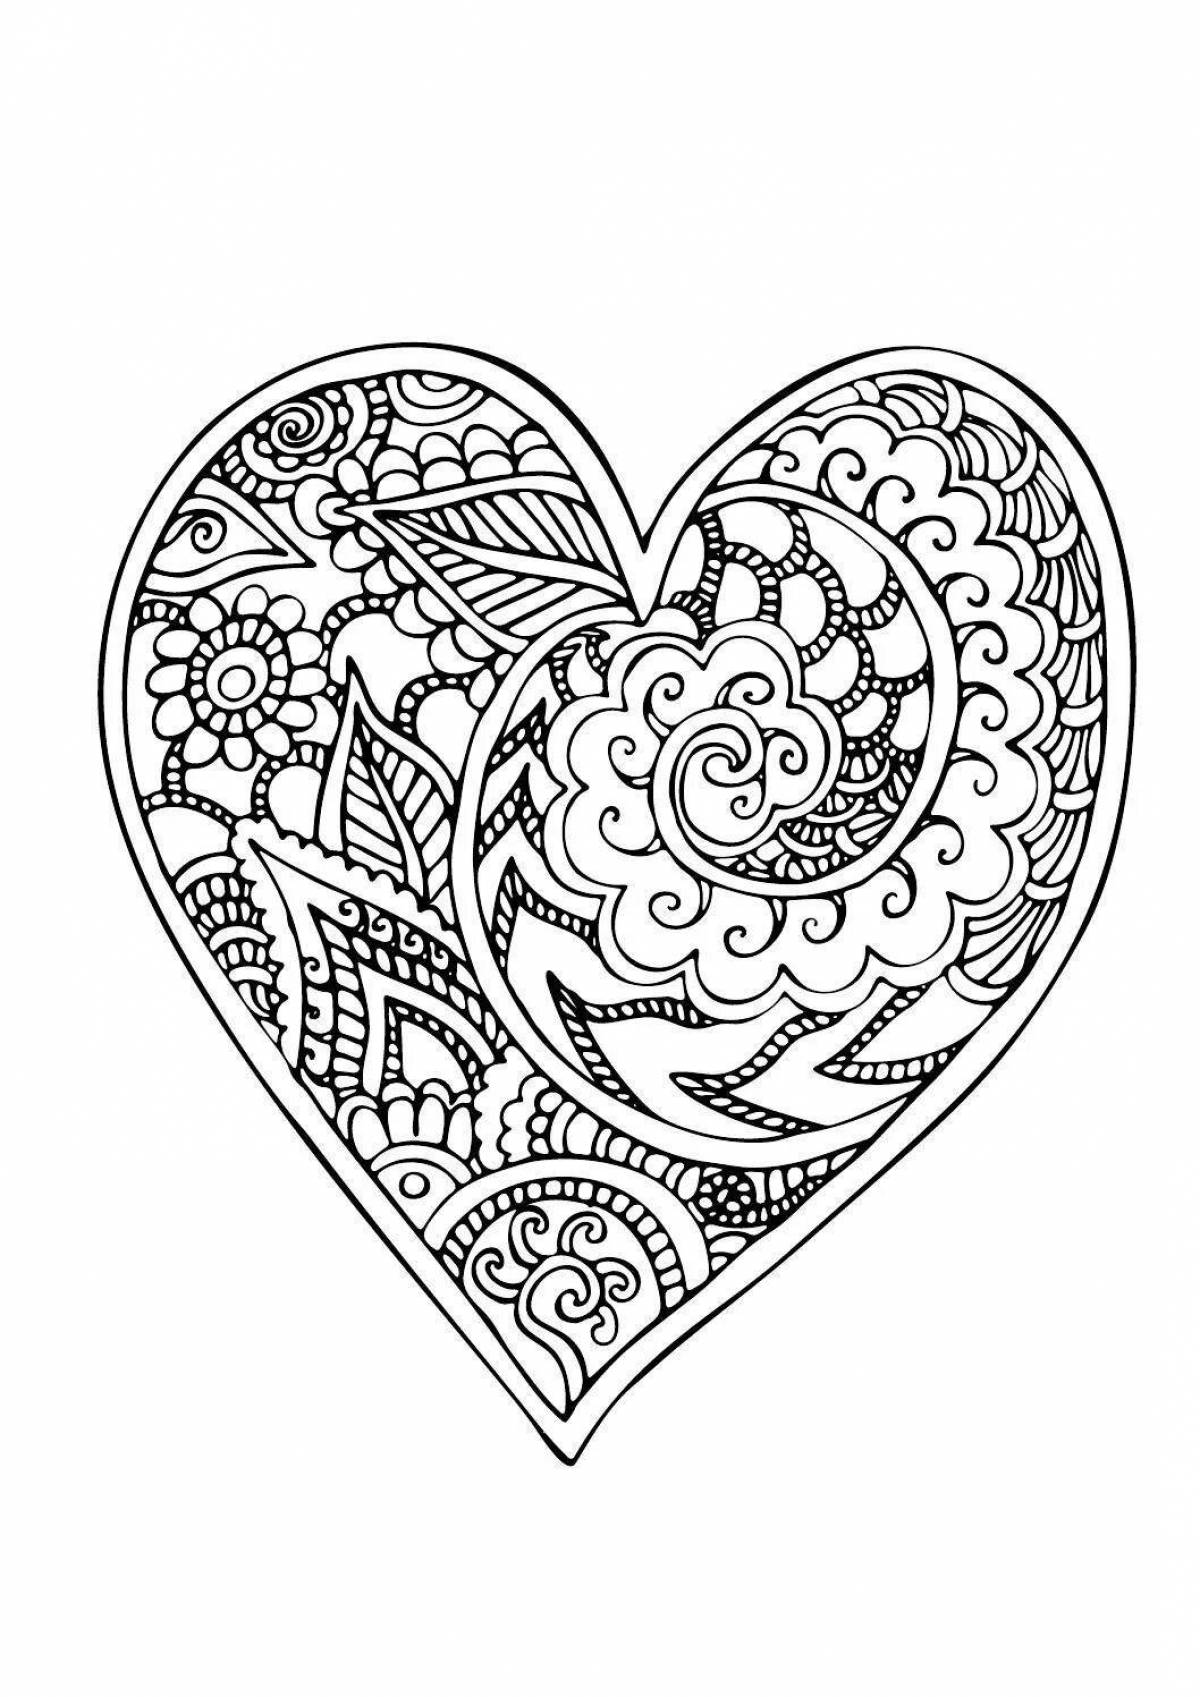 Glamorous heart coloring book